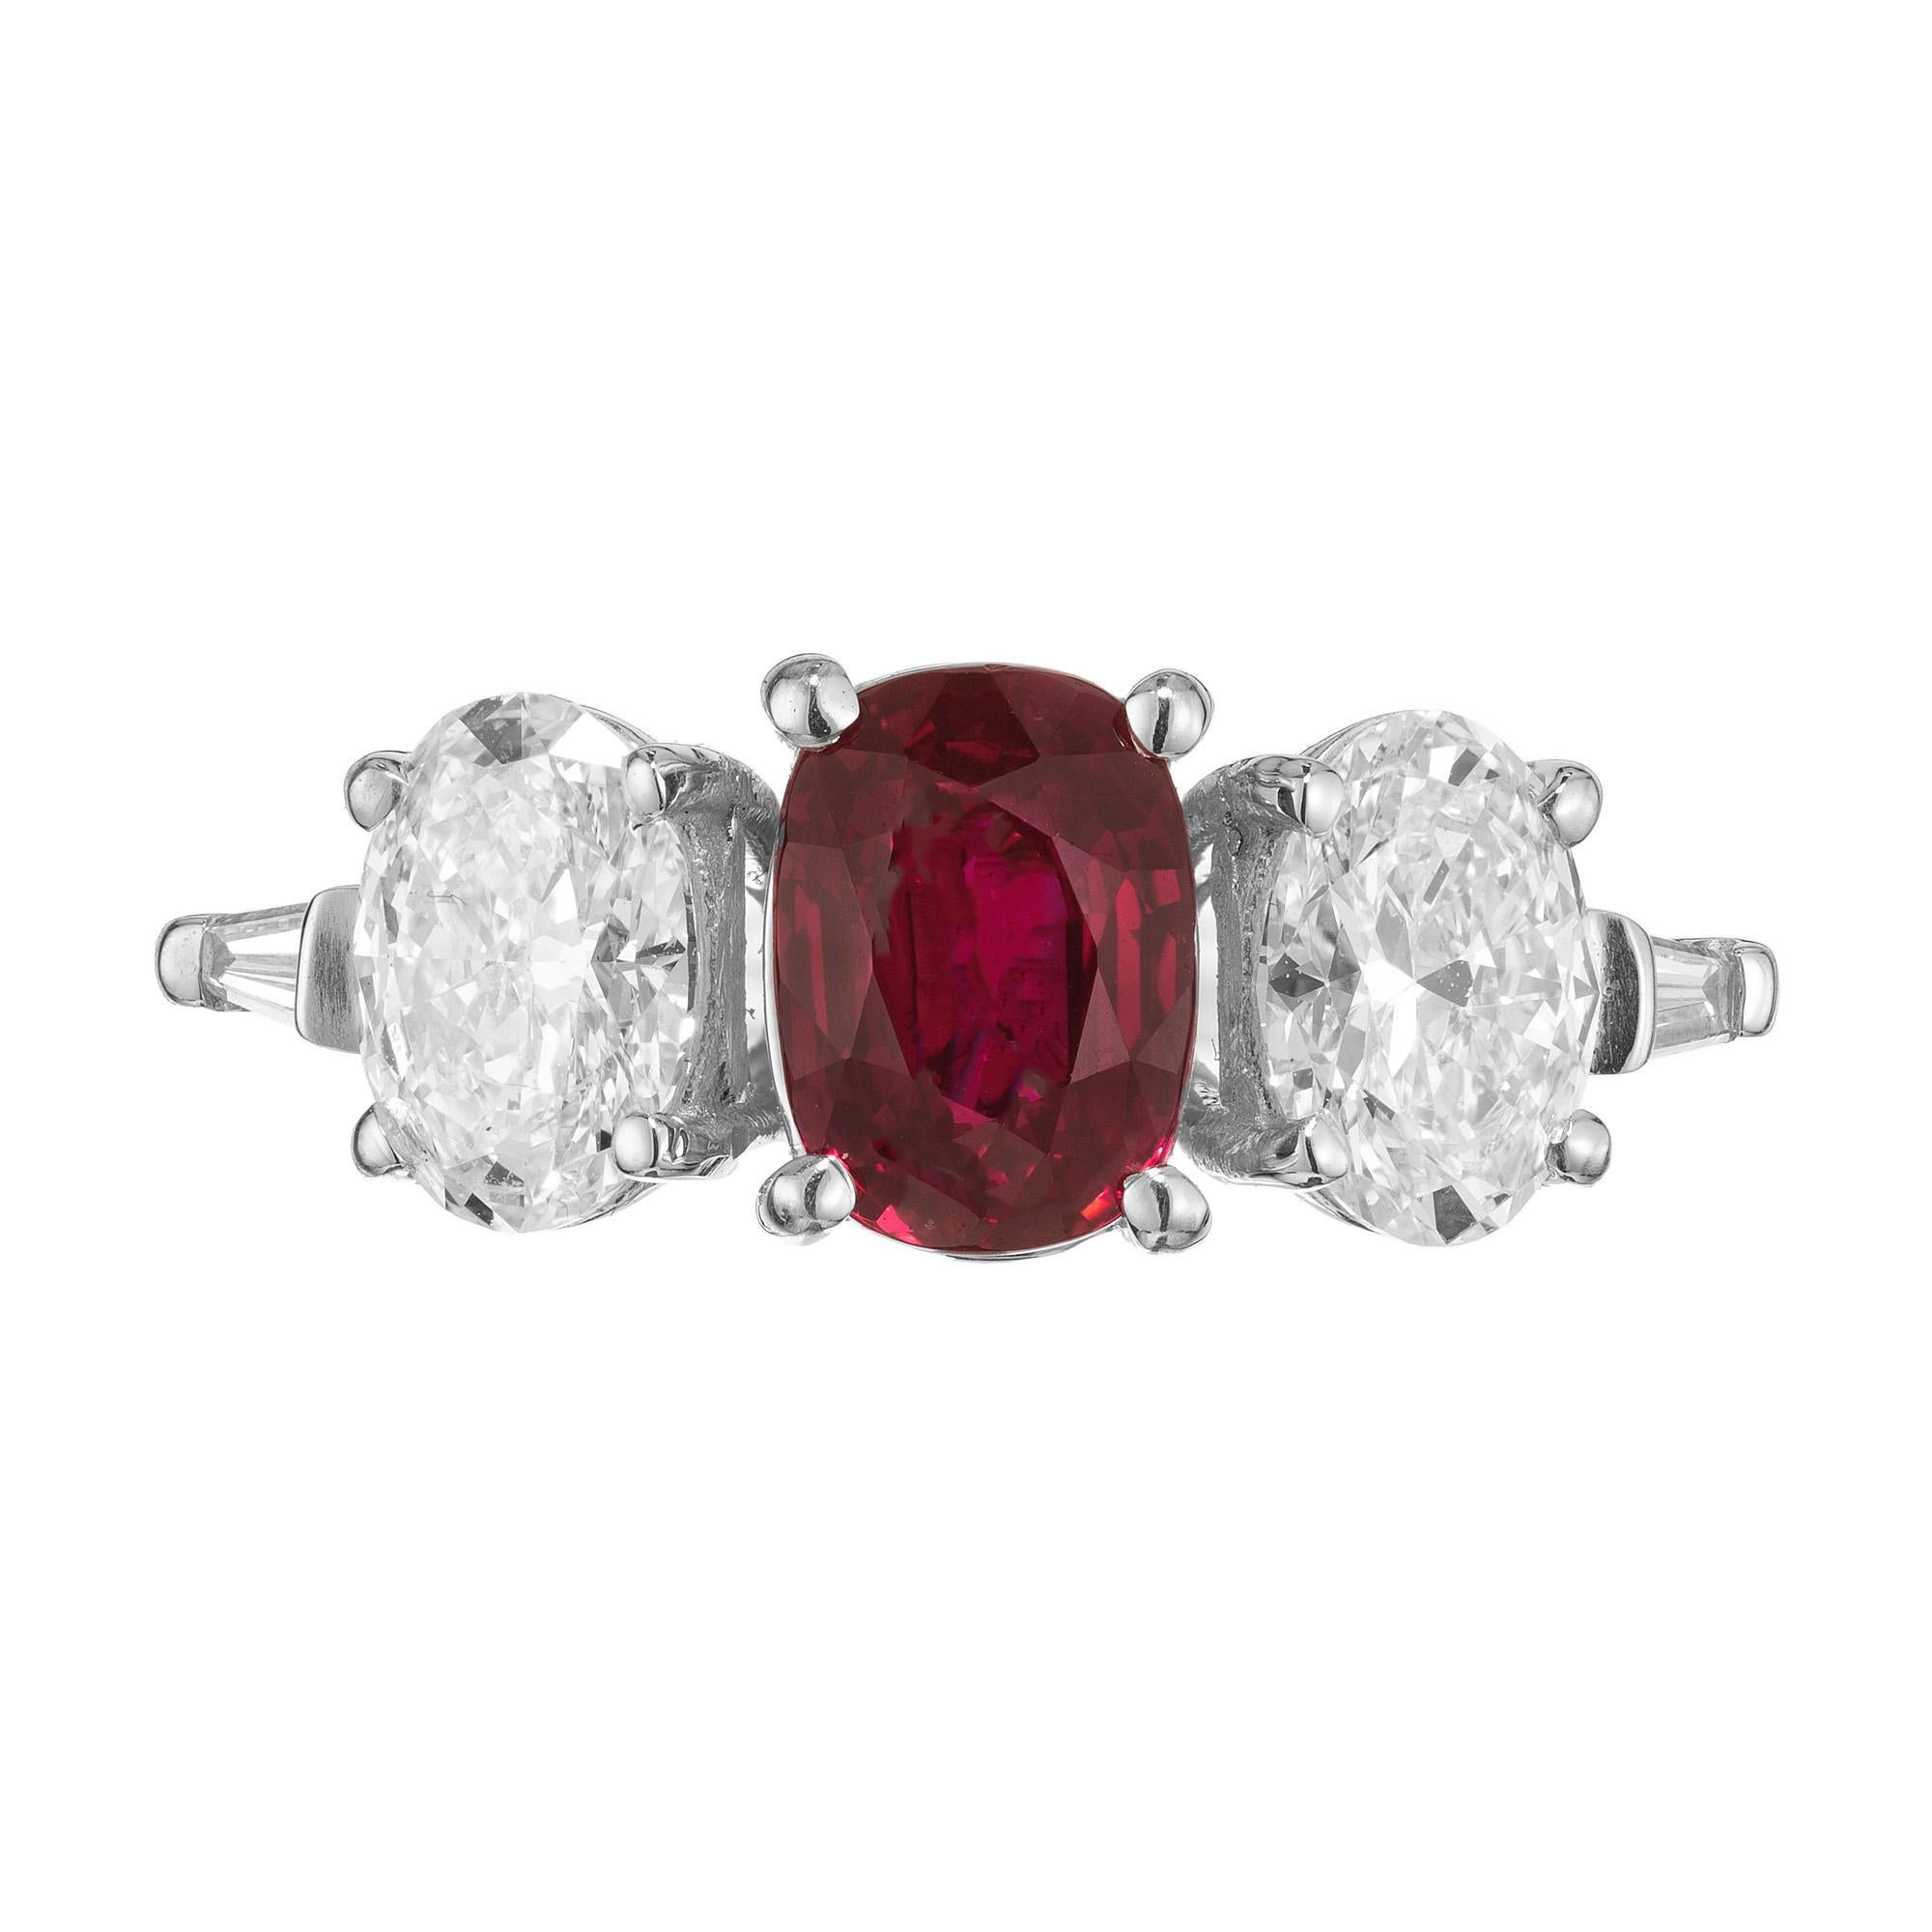 Exquisite ruby and diamond engagement ring. The ring begins with a GIA certified oval center ruby totaling 2.02cts. Mounted in a platinum setting and paired with two perfectly matched dazzling GIA certified oval accent diamonds totaling 1.46cts. 2